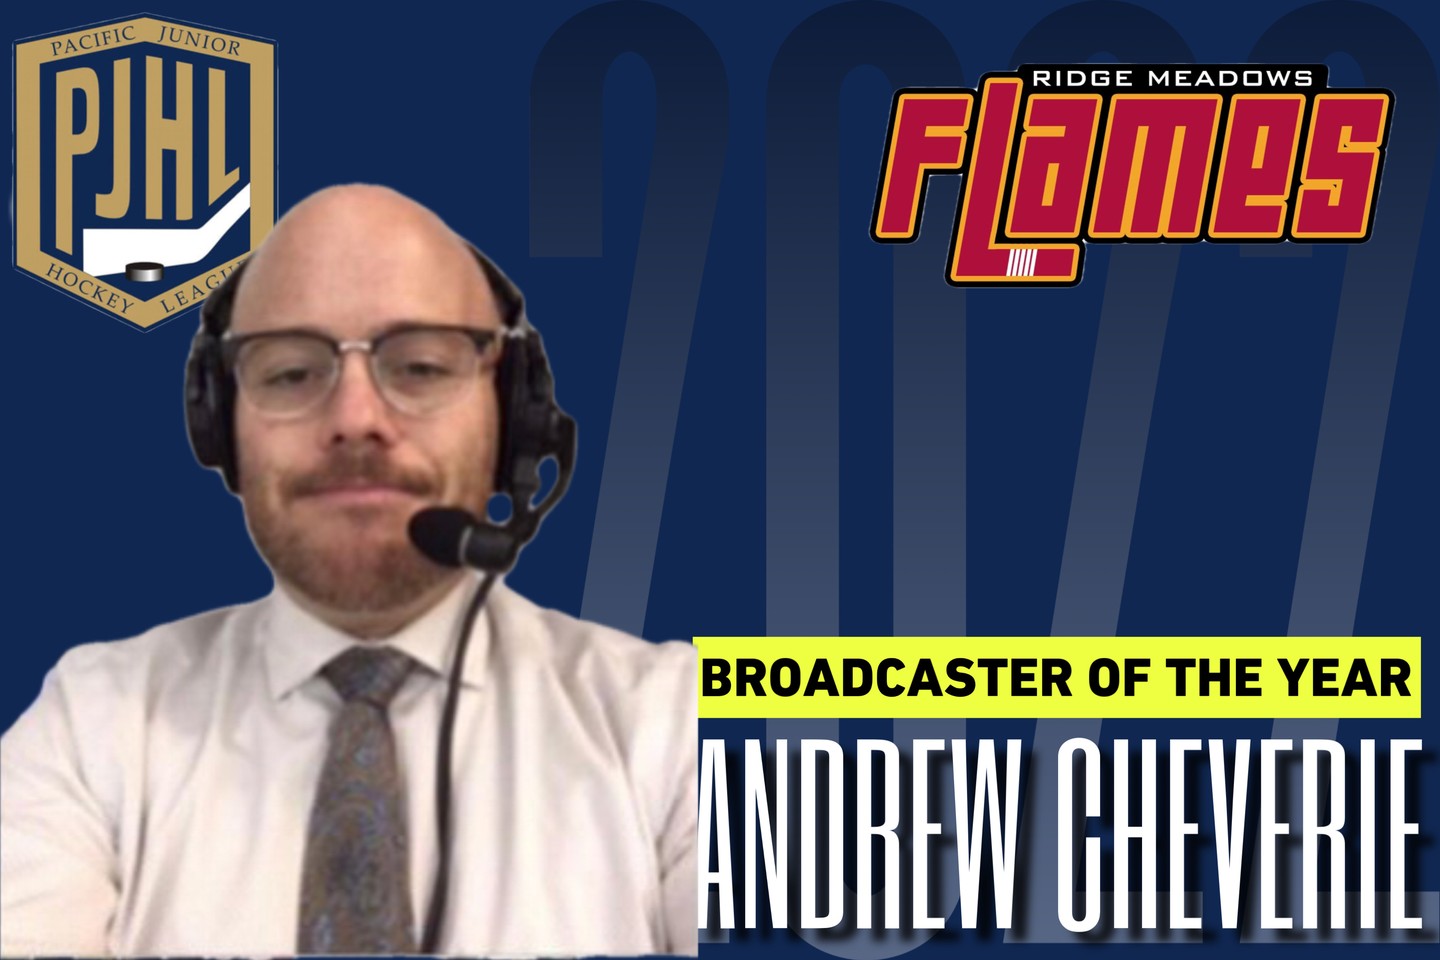 Congratulations to Andrew Cheverie of the @ridgemeadowsflames on being voted 2021-22 PJHL Broadcaster of the Year #PJHLBC